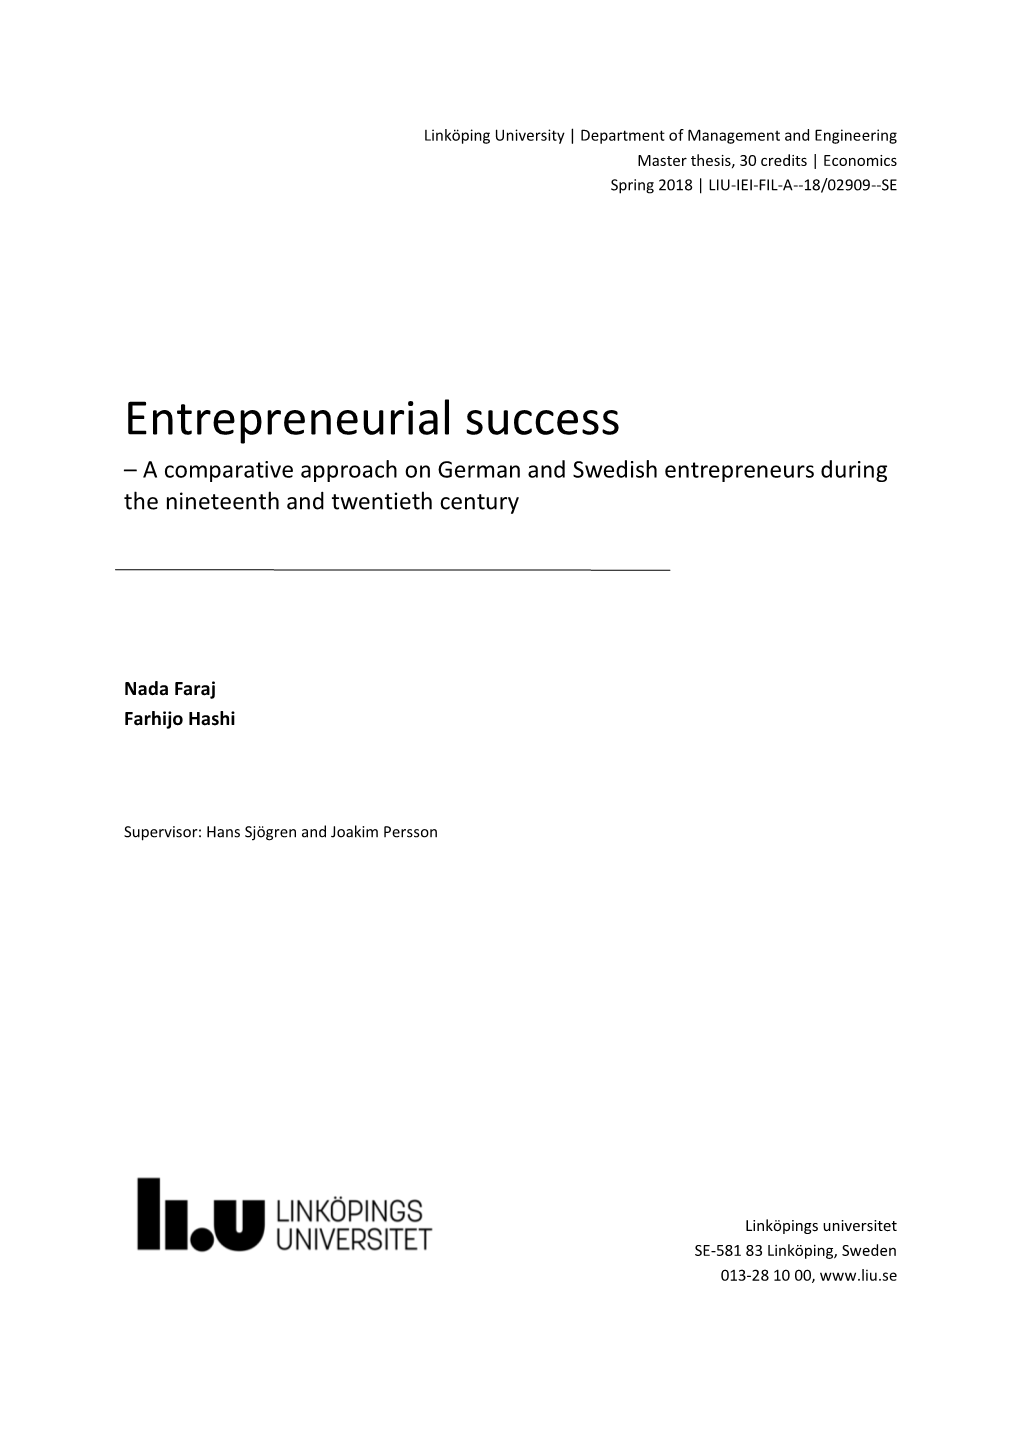 Entrepreneurial Success – a Comparative Approach on German and Swedish Entrepreneurs During the Nineteenth and Twentieth Century